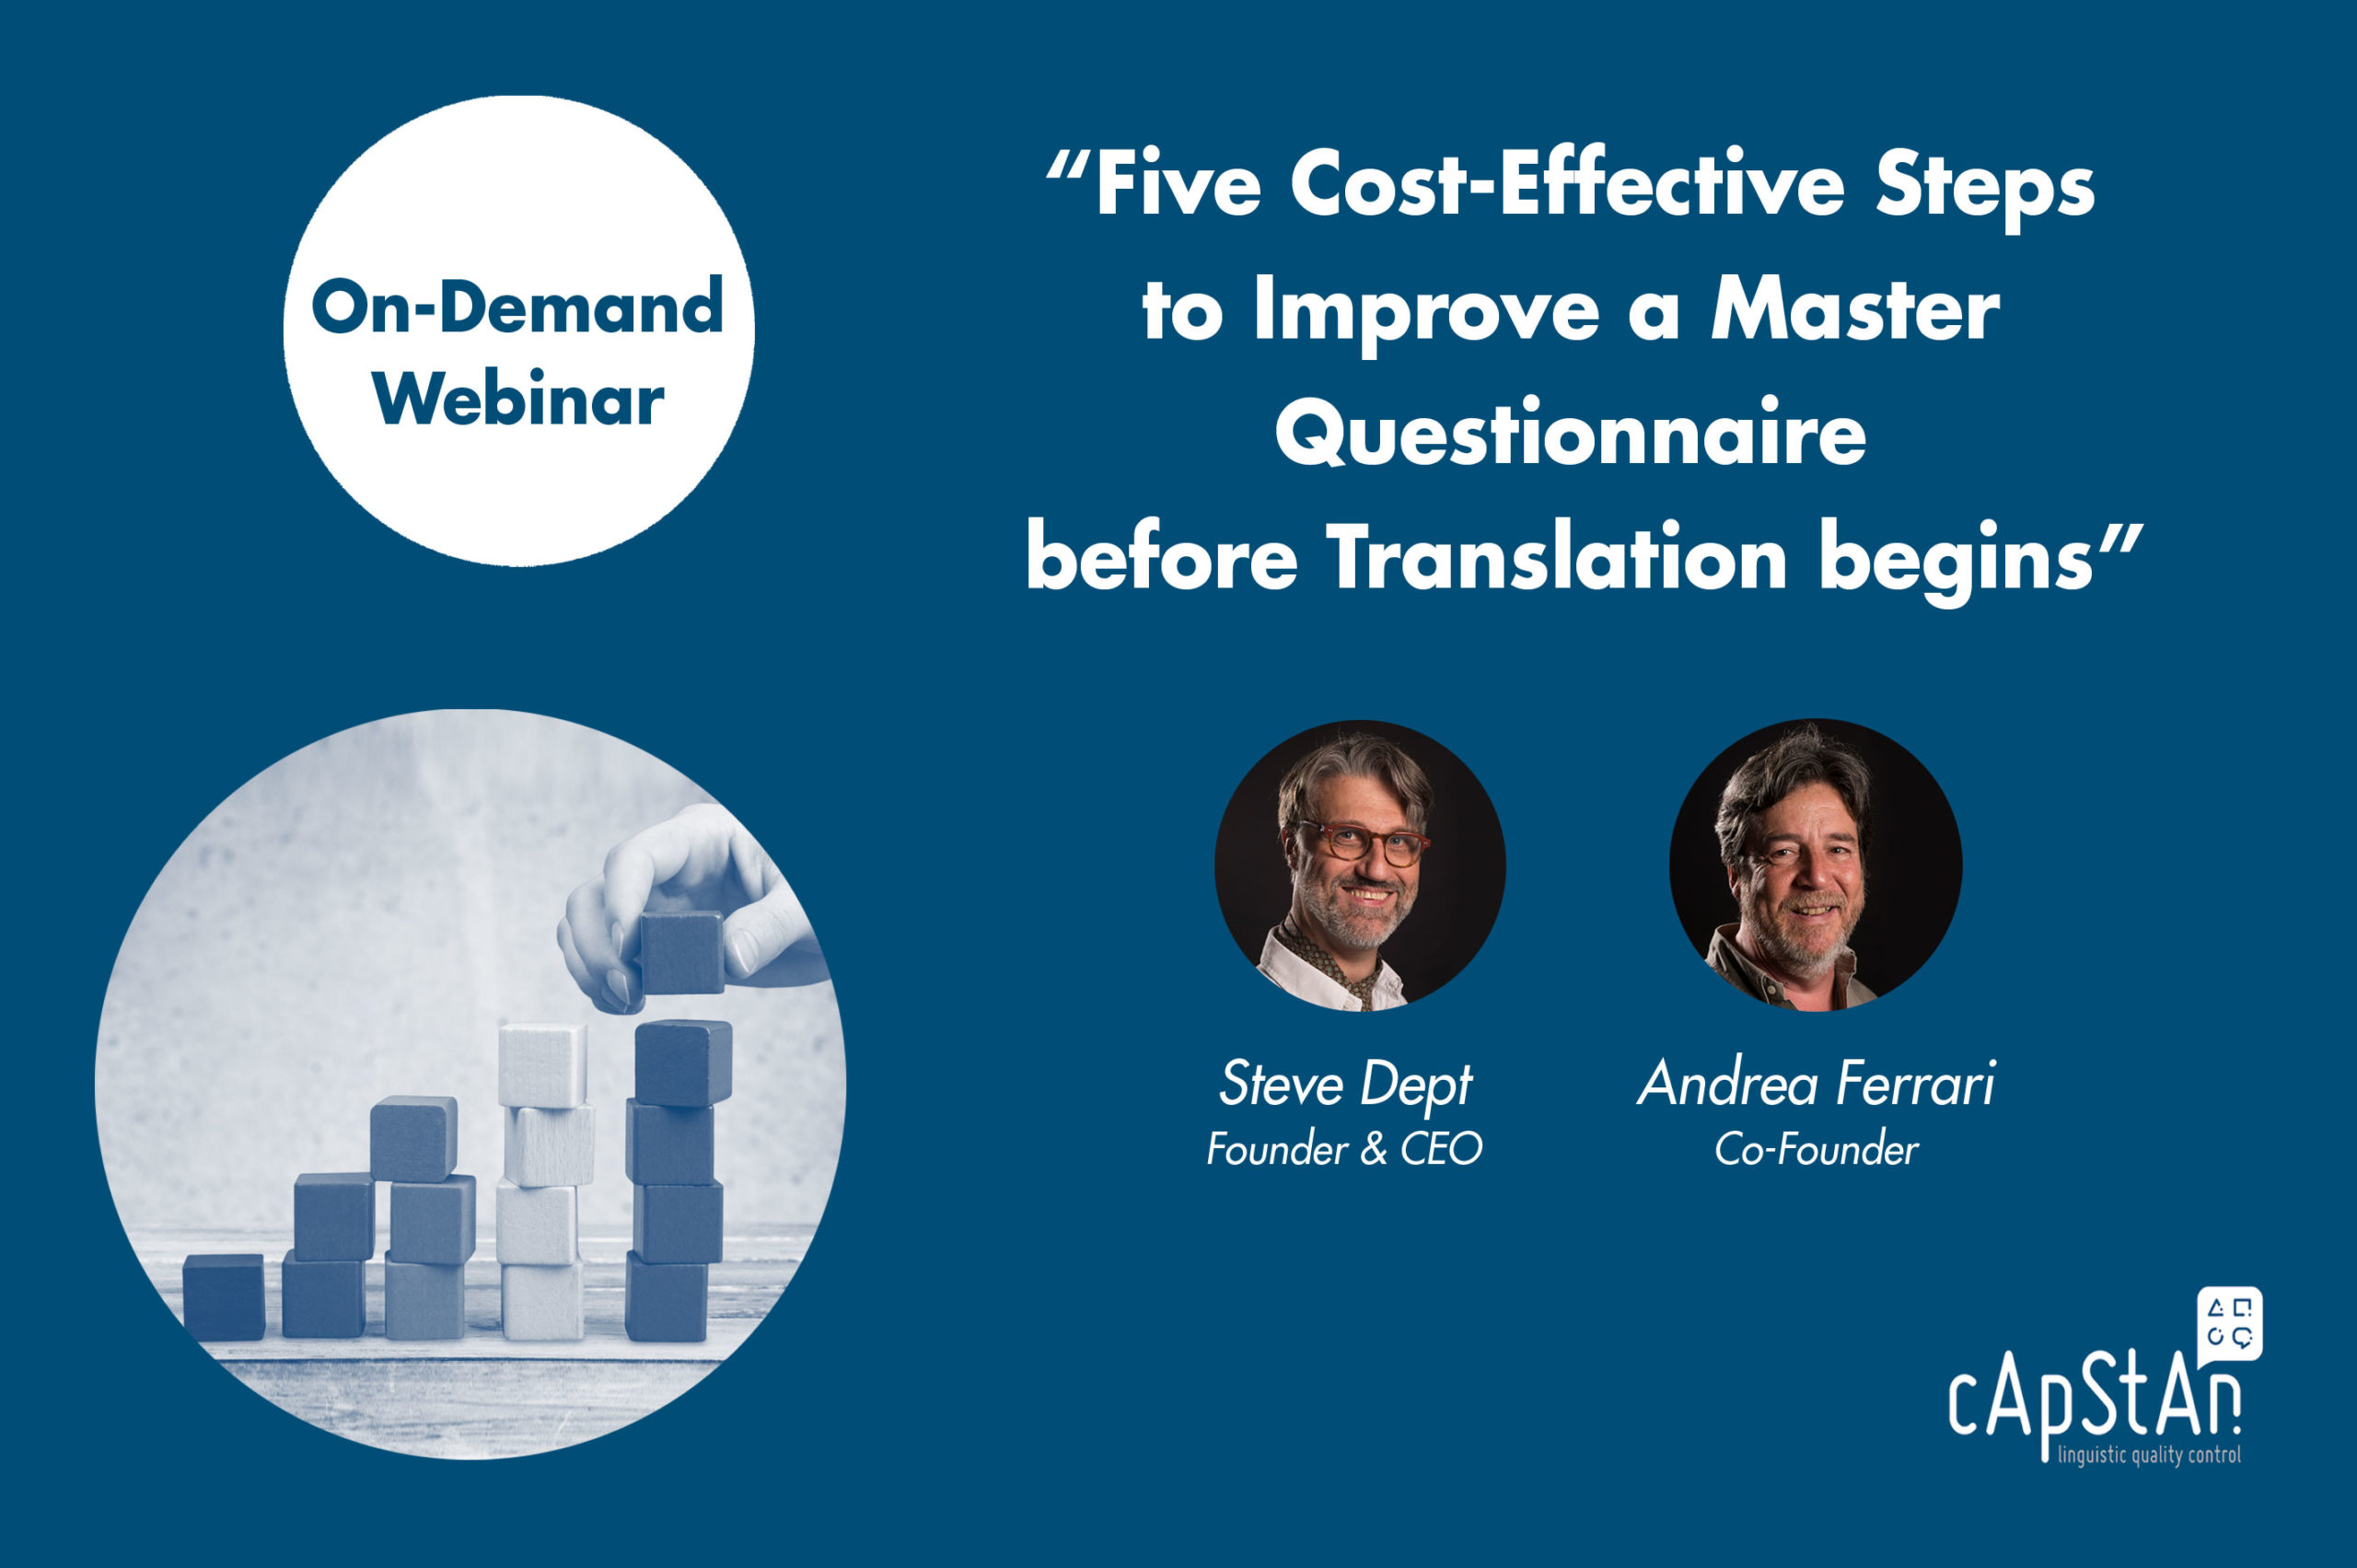 On-Demand Webinar | Five Cost-Effective Steps to Improve a Master Questionnaire before Translation begins